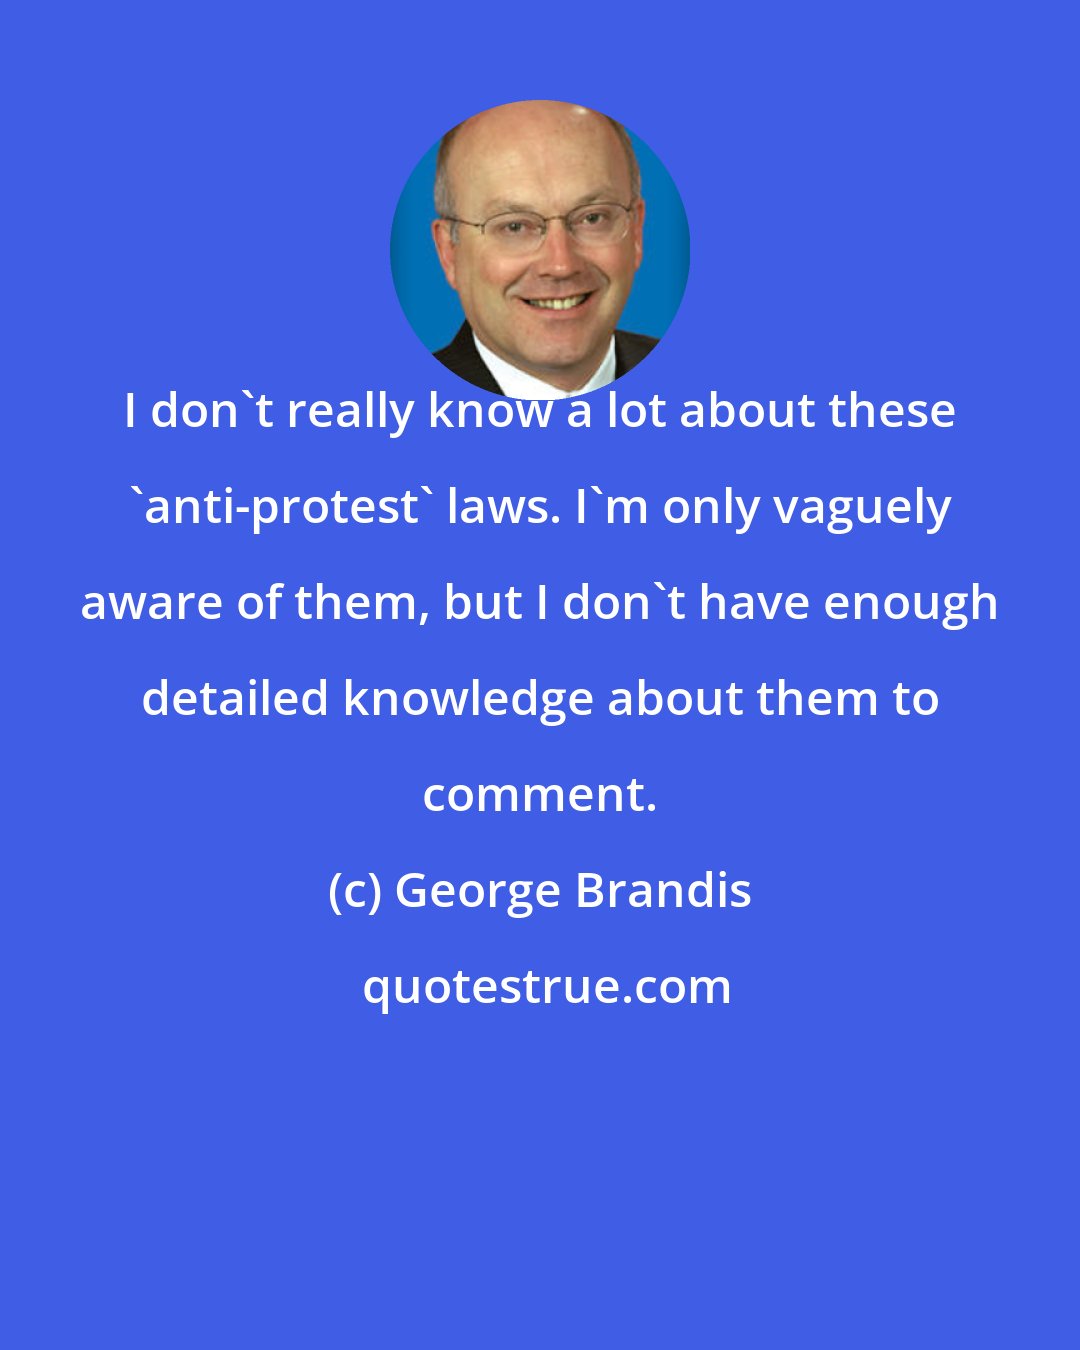 George Brandis: I don't really know a lot about these 'anti-protest' laws. I'm only vaguely aware of them, but I don't have enough detailed knowledge about them to comment.